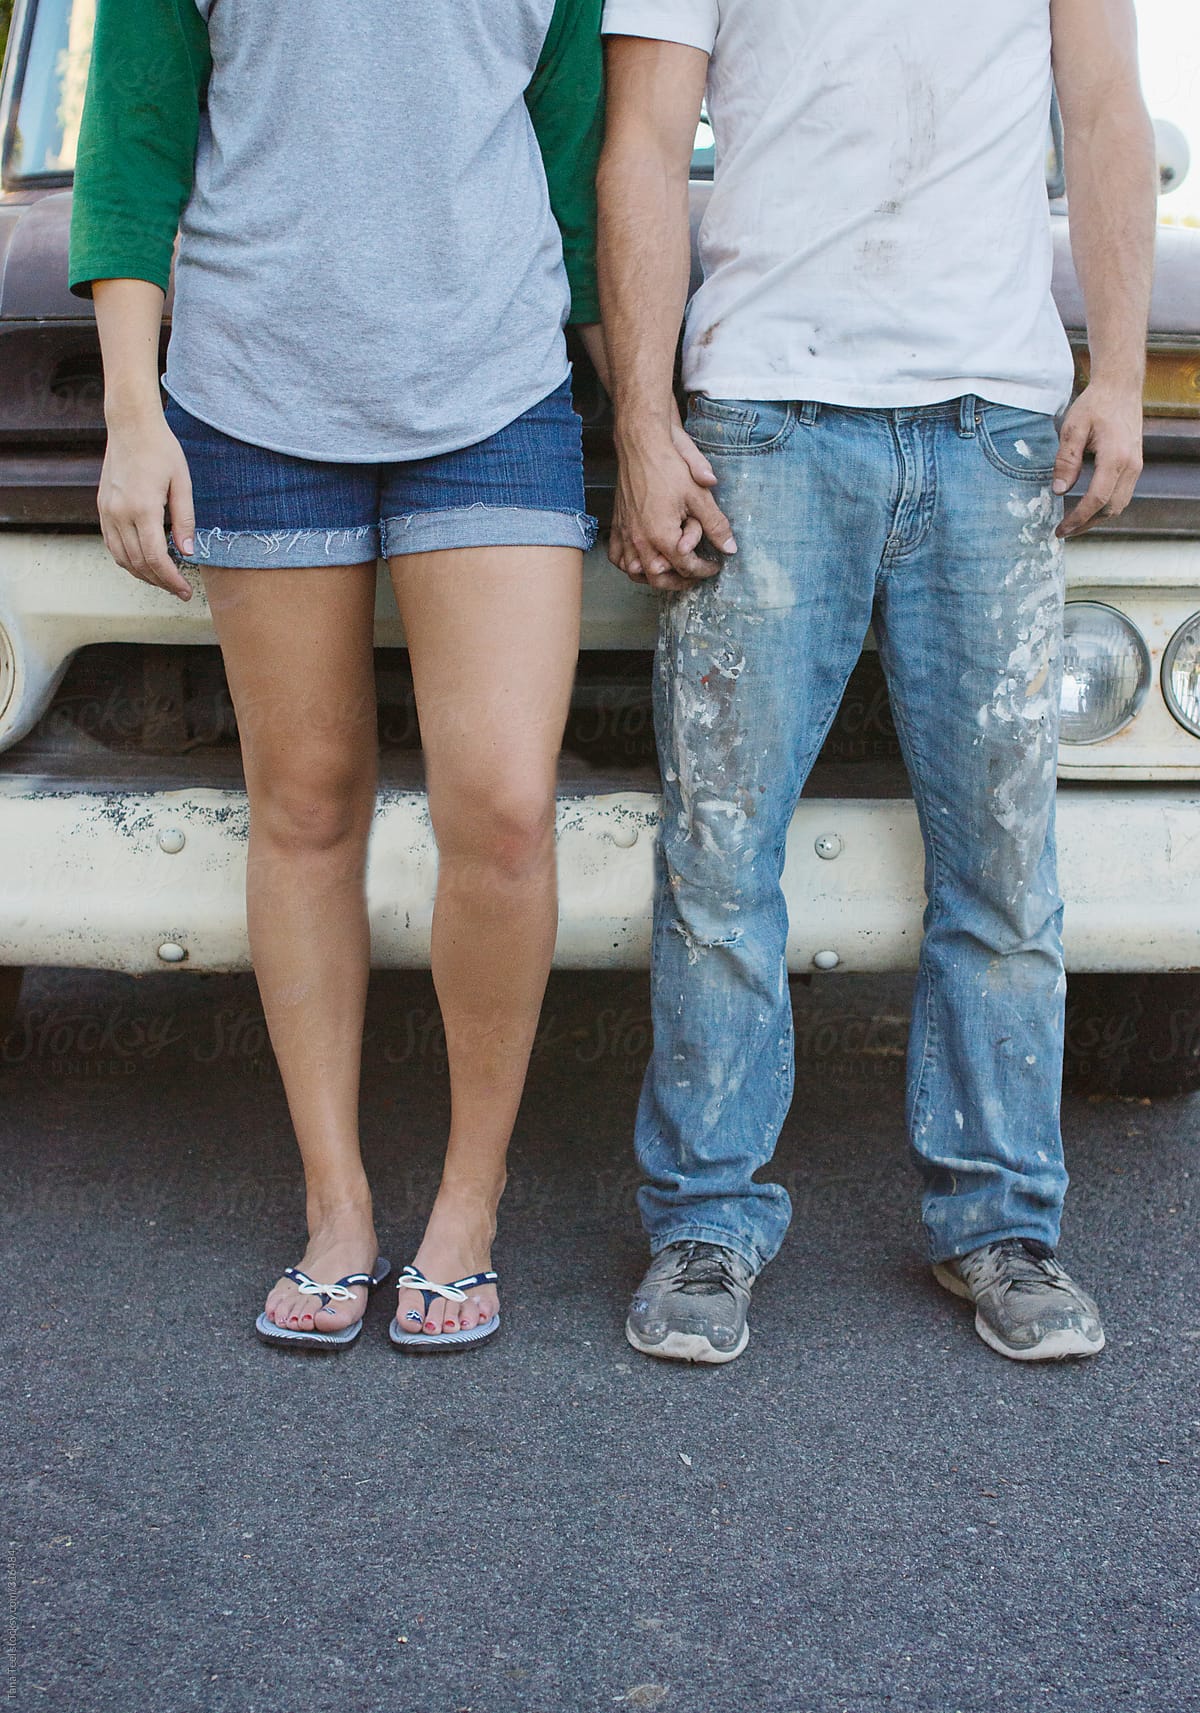 Young couple hold hands while standing in front of old pickup